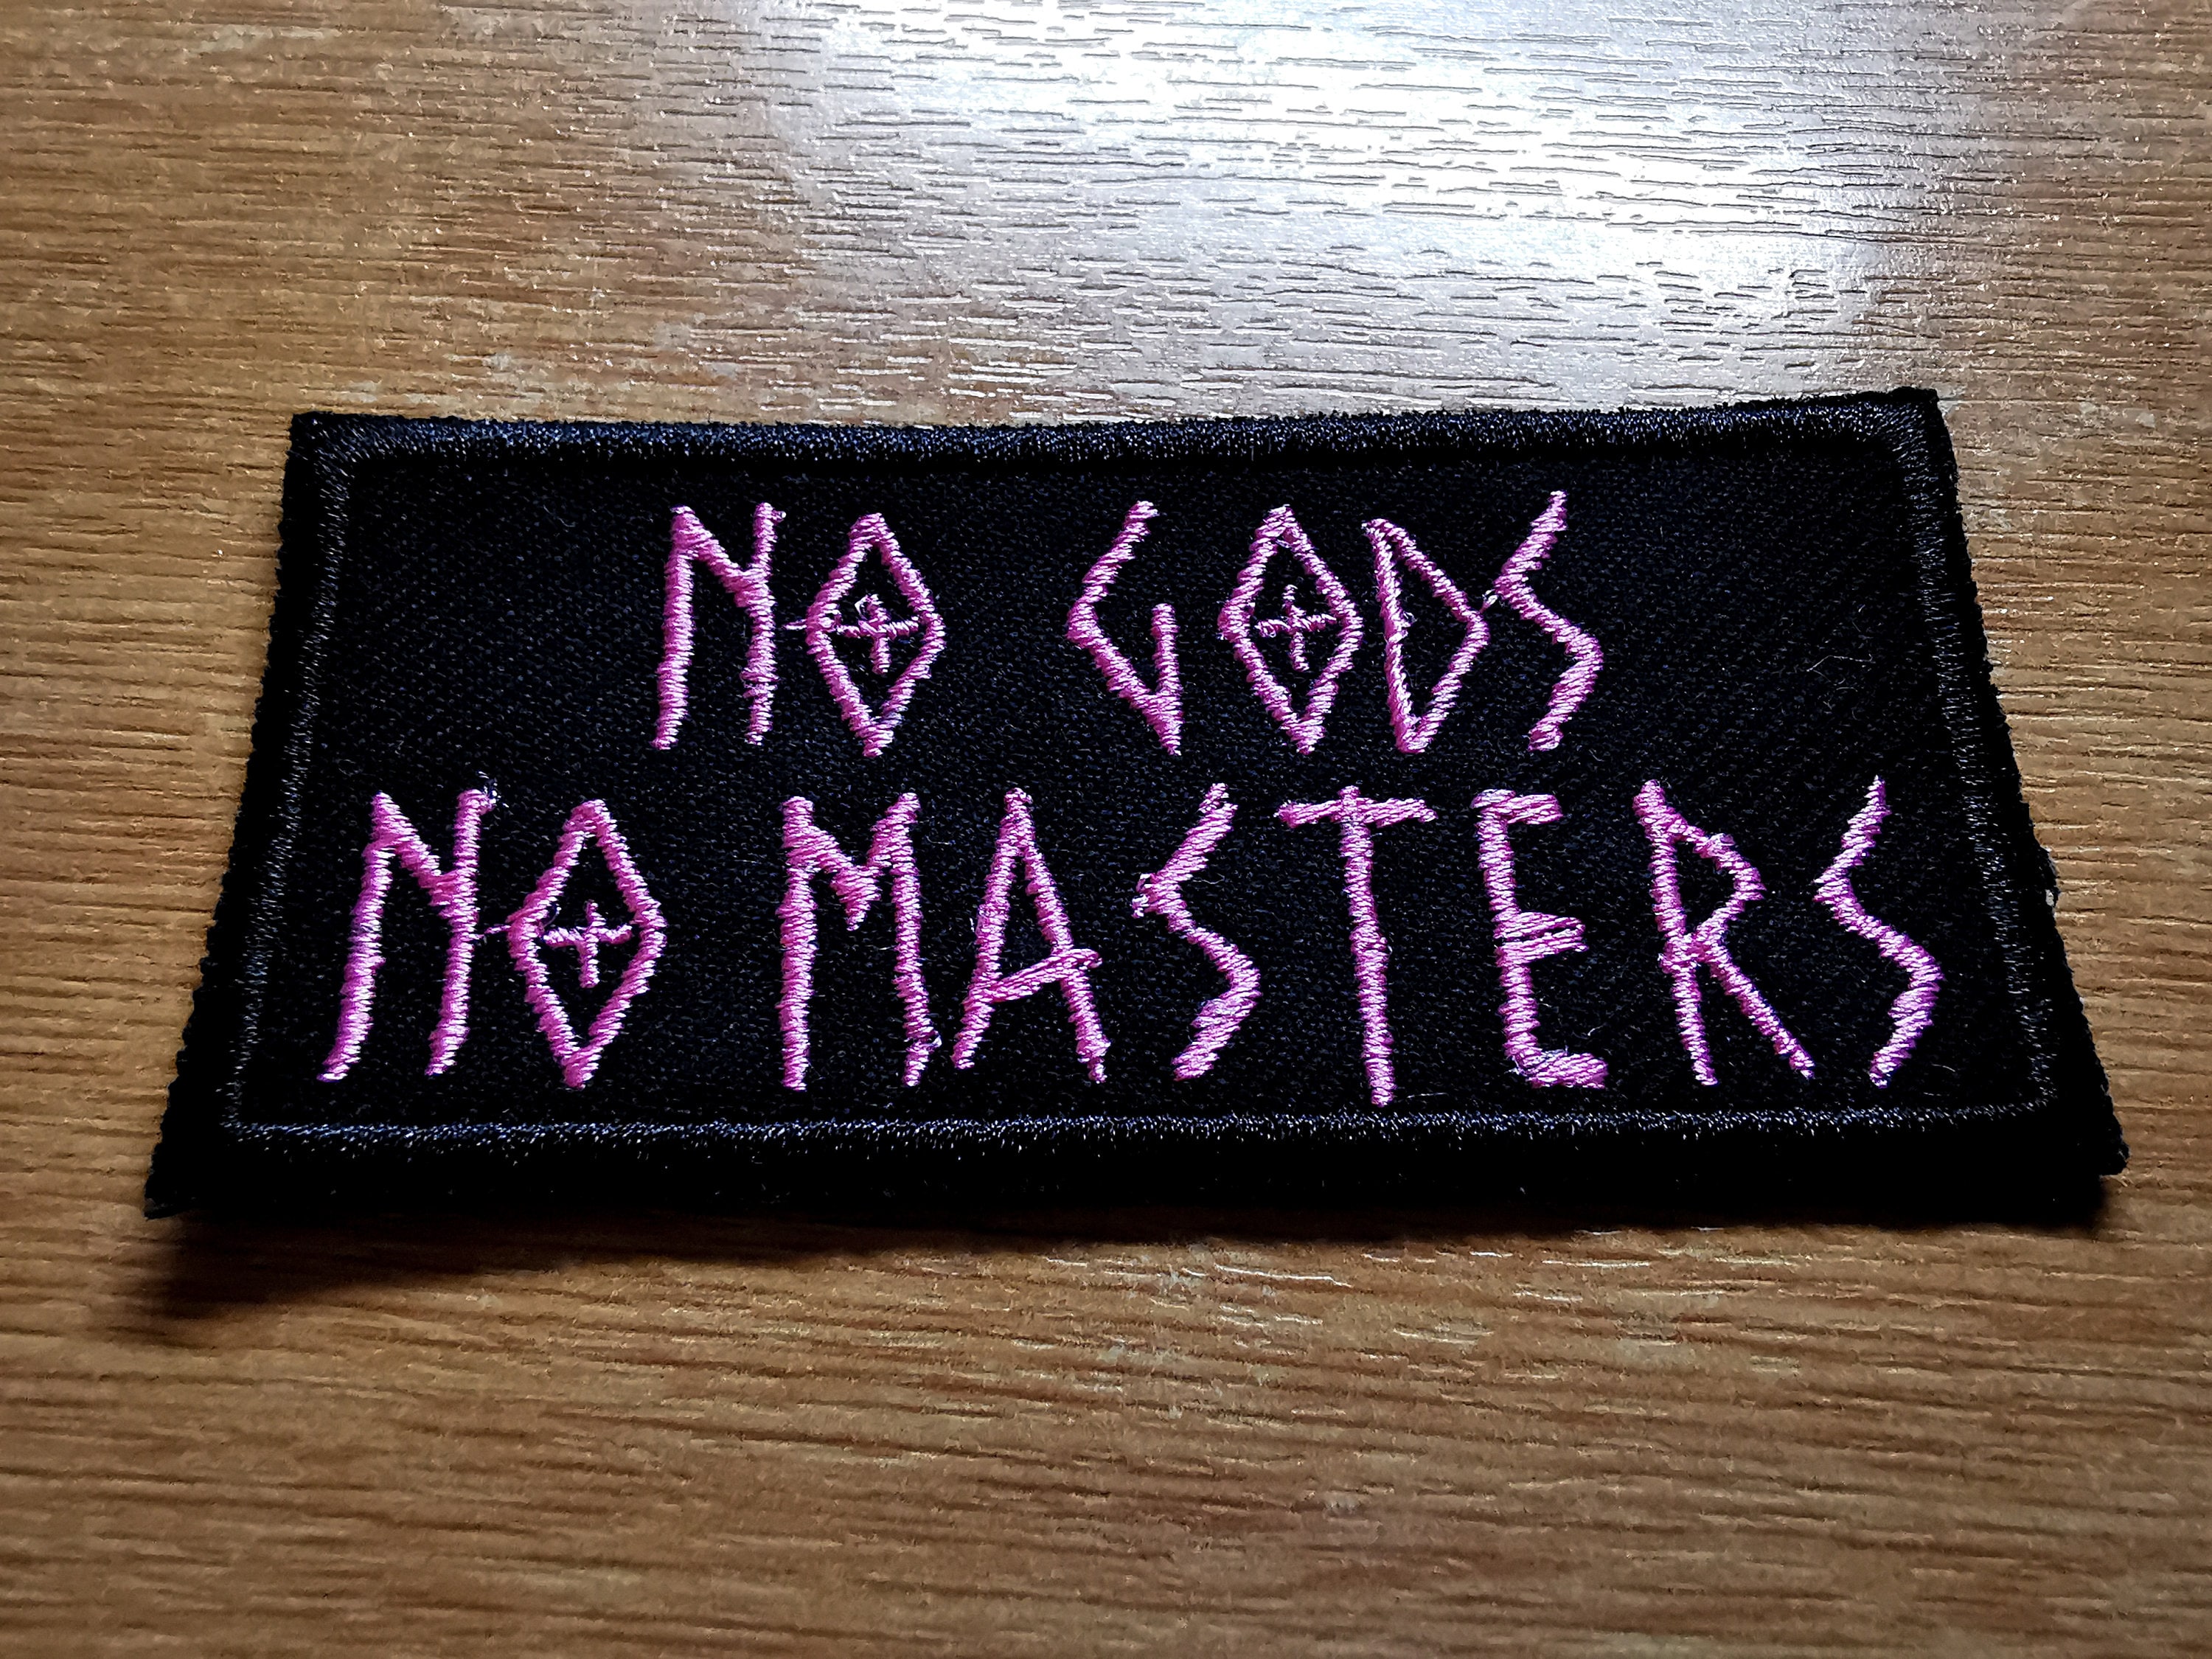 Masters Custom Patches (@MastersPatches) / X